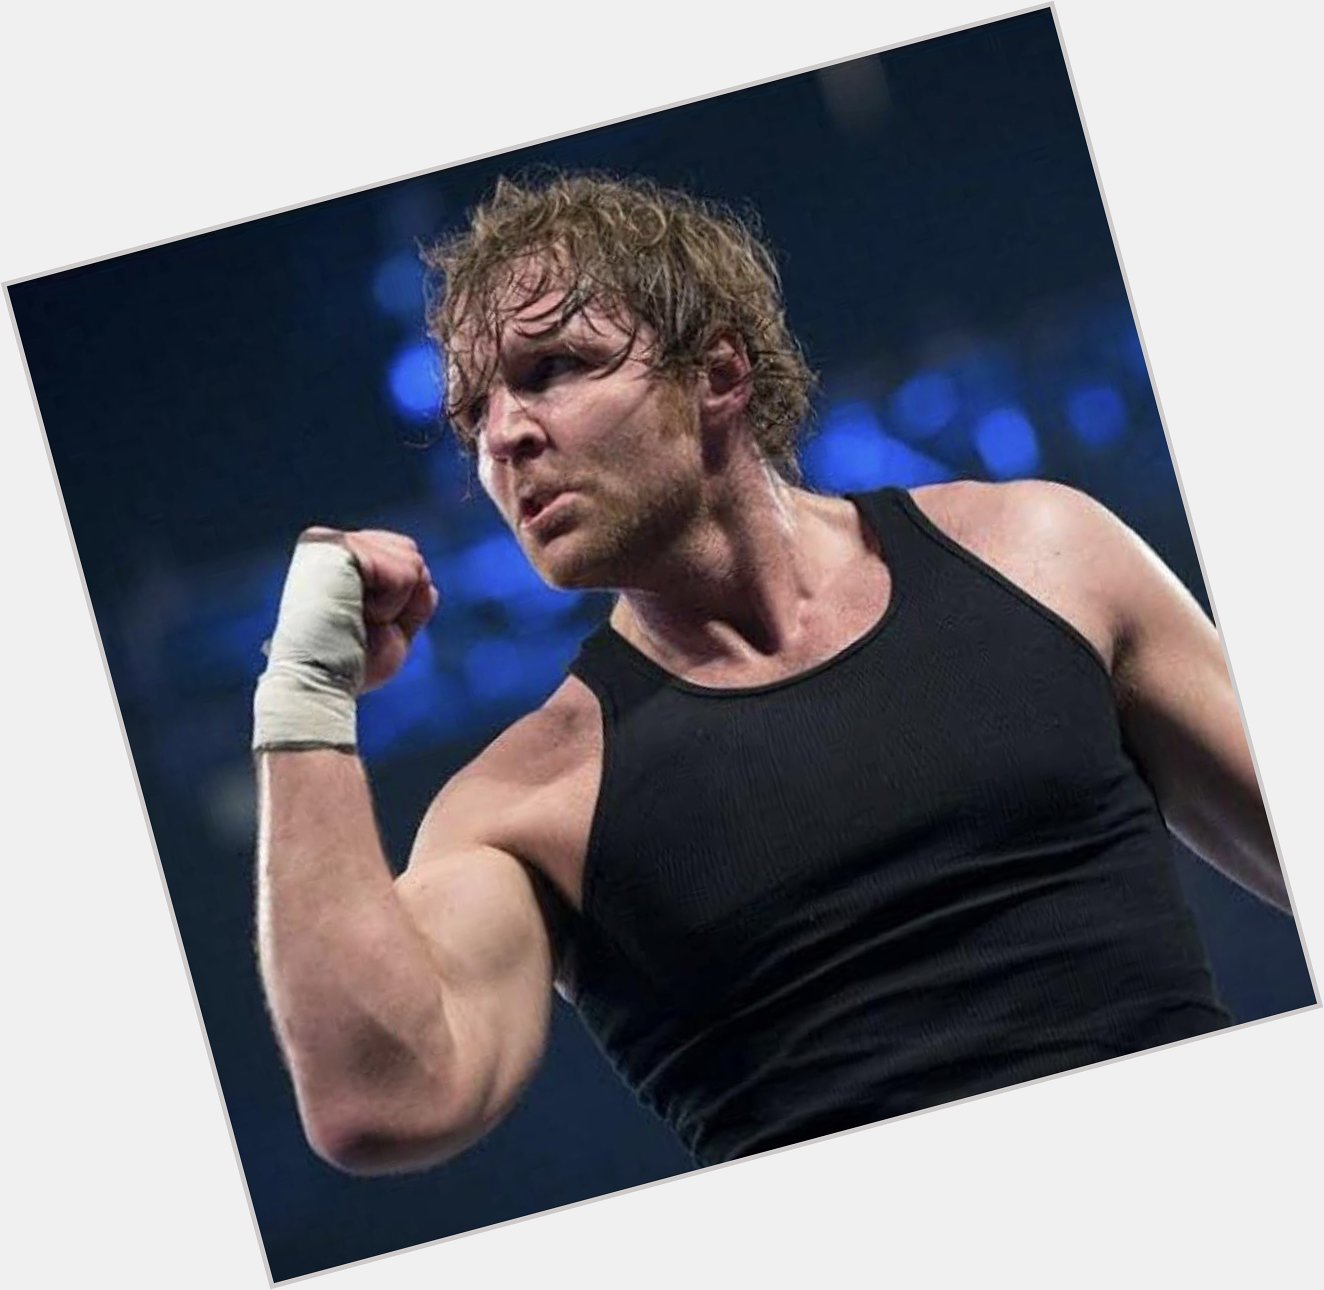 For me he will always be Dean Ambrose 

Happy birthday 